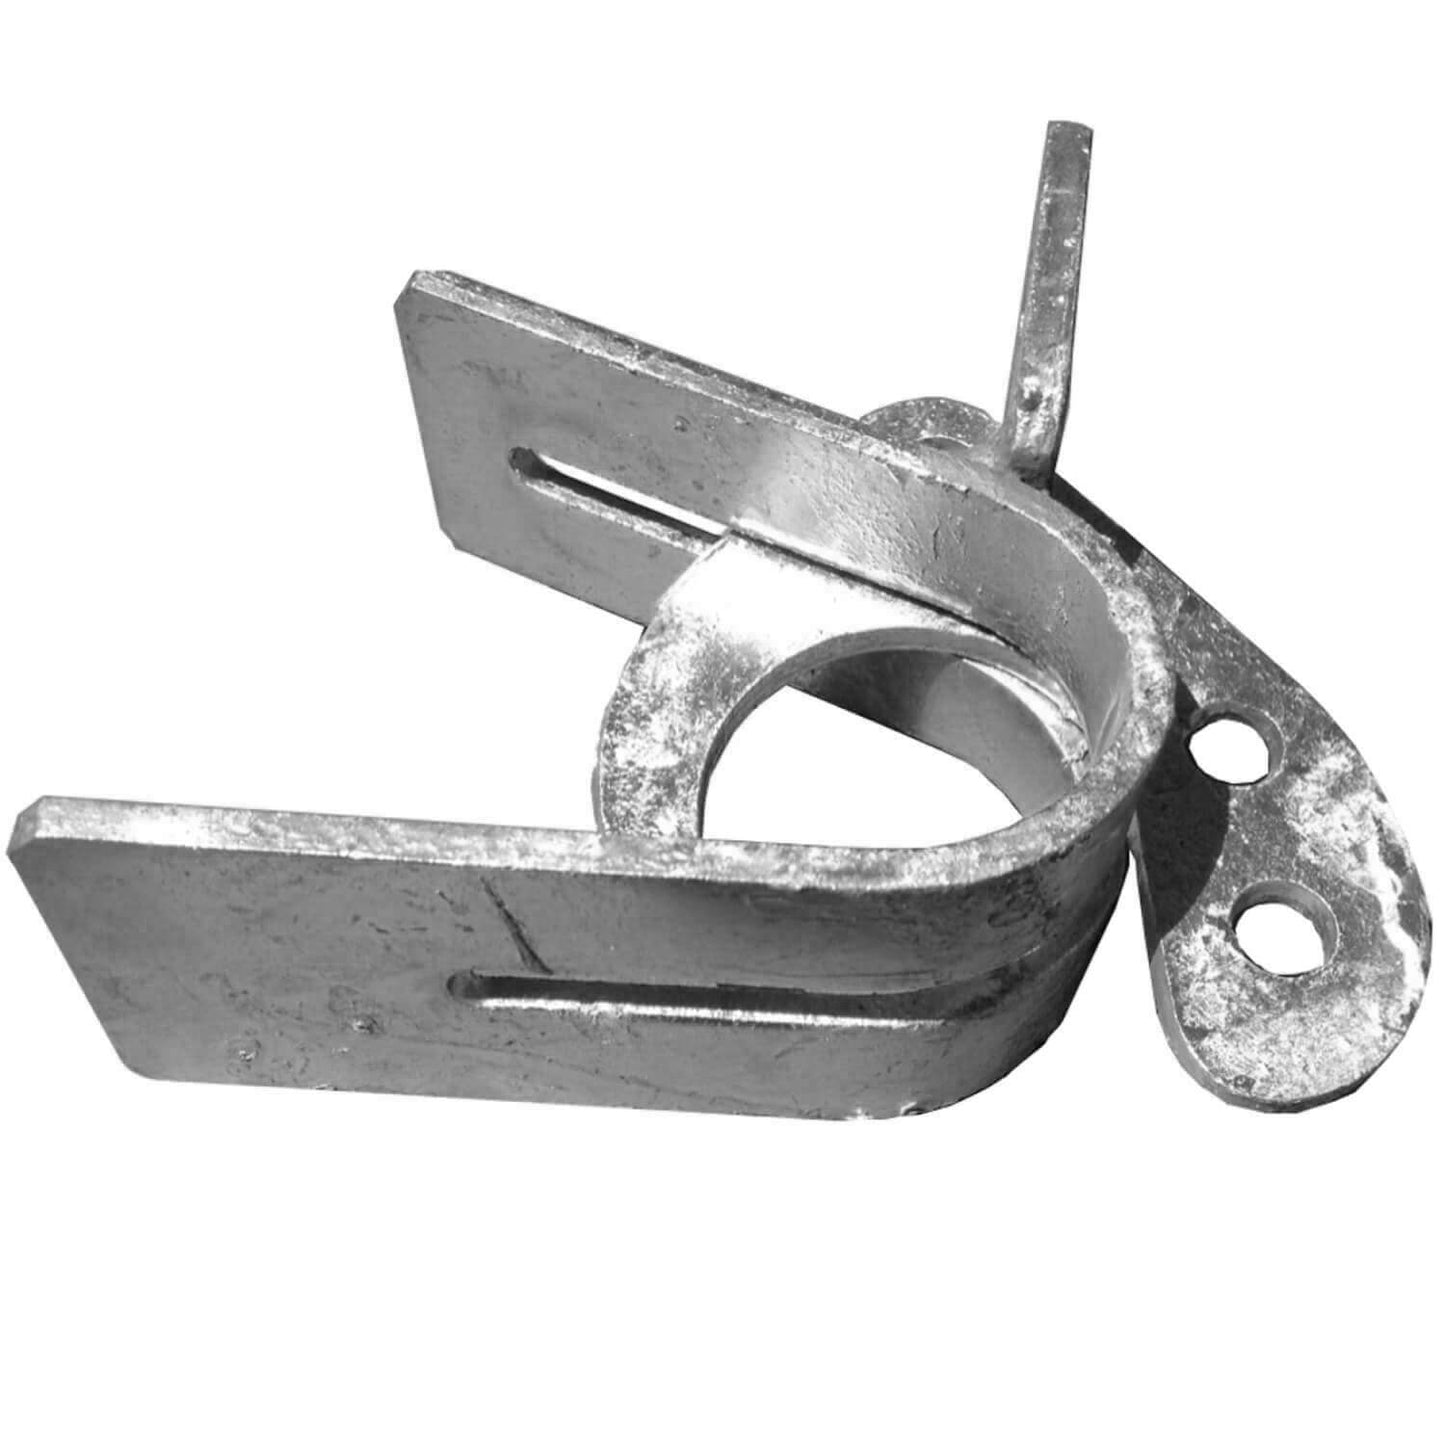 ROLLING OFFSET LATCH - "LOCK N' LATCH": (for 1-5/8" to 1-7/8") Chain Link Fence Gate Offset Latch (Rolling, Sliding, or Cantilevered Gate Latch)